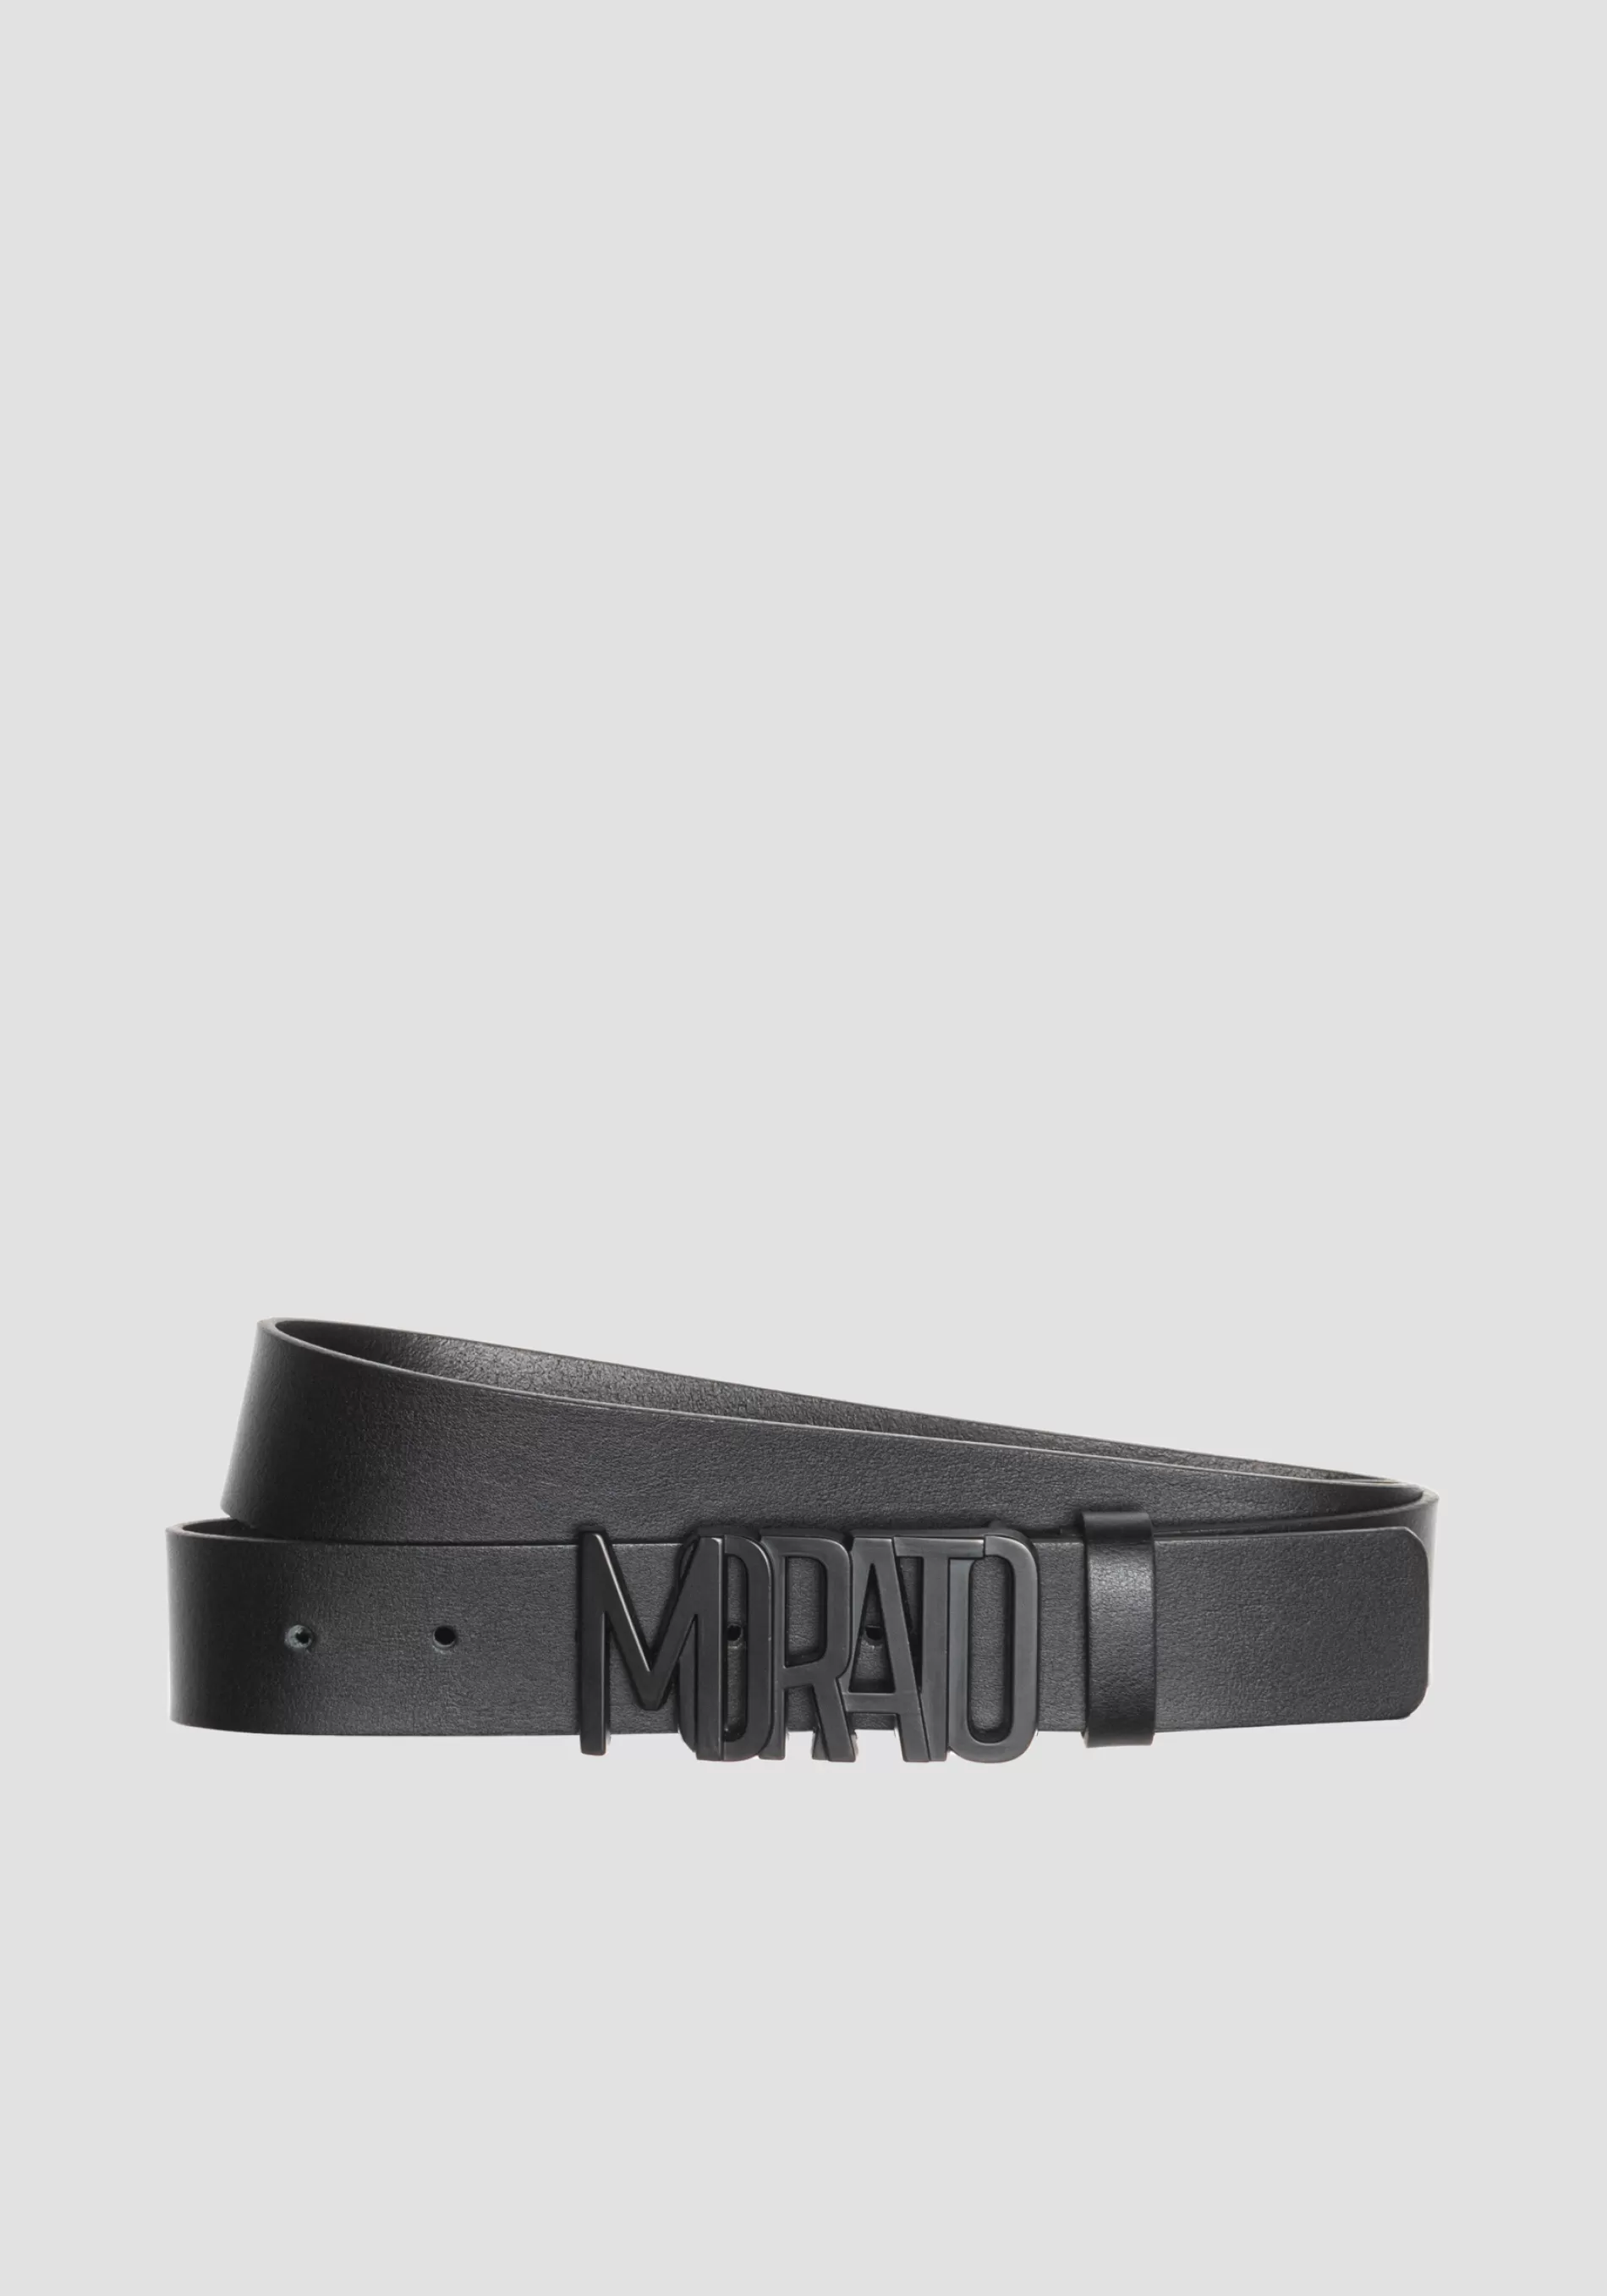 Cheap GENUINE LEATHER BELT WITH "MORATO" TAB Belts